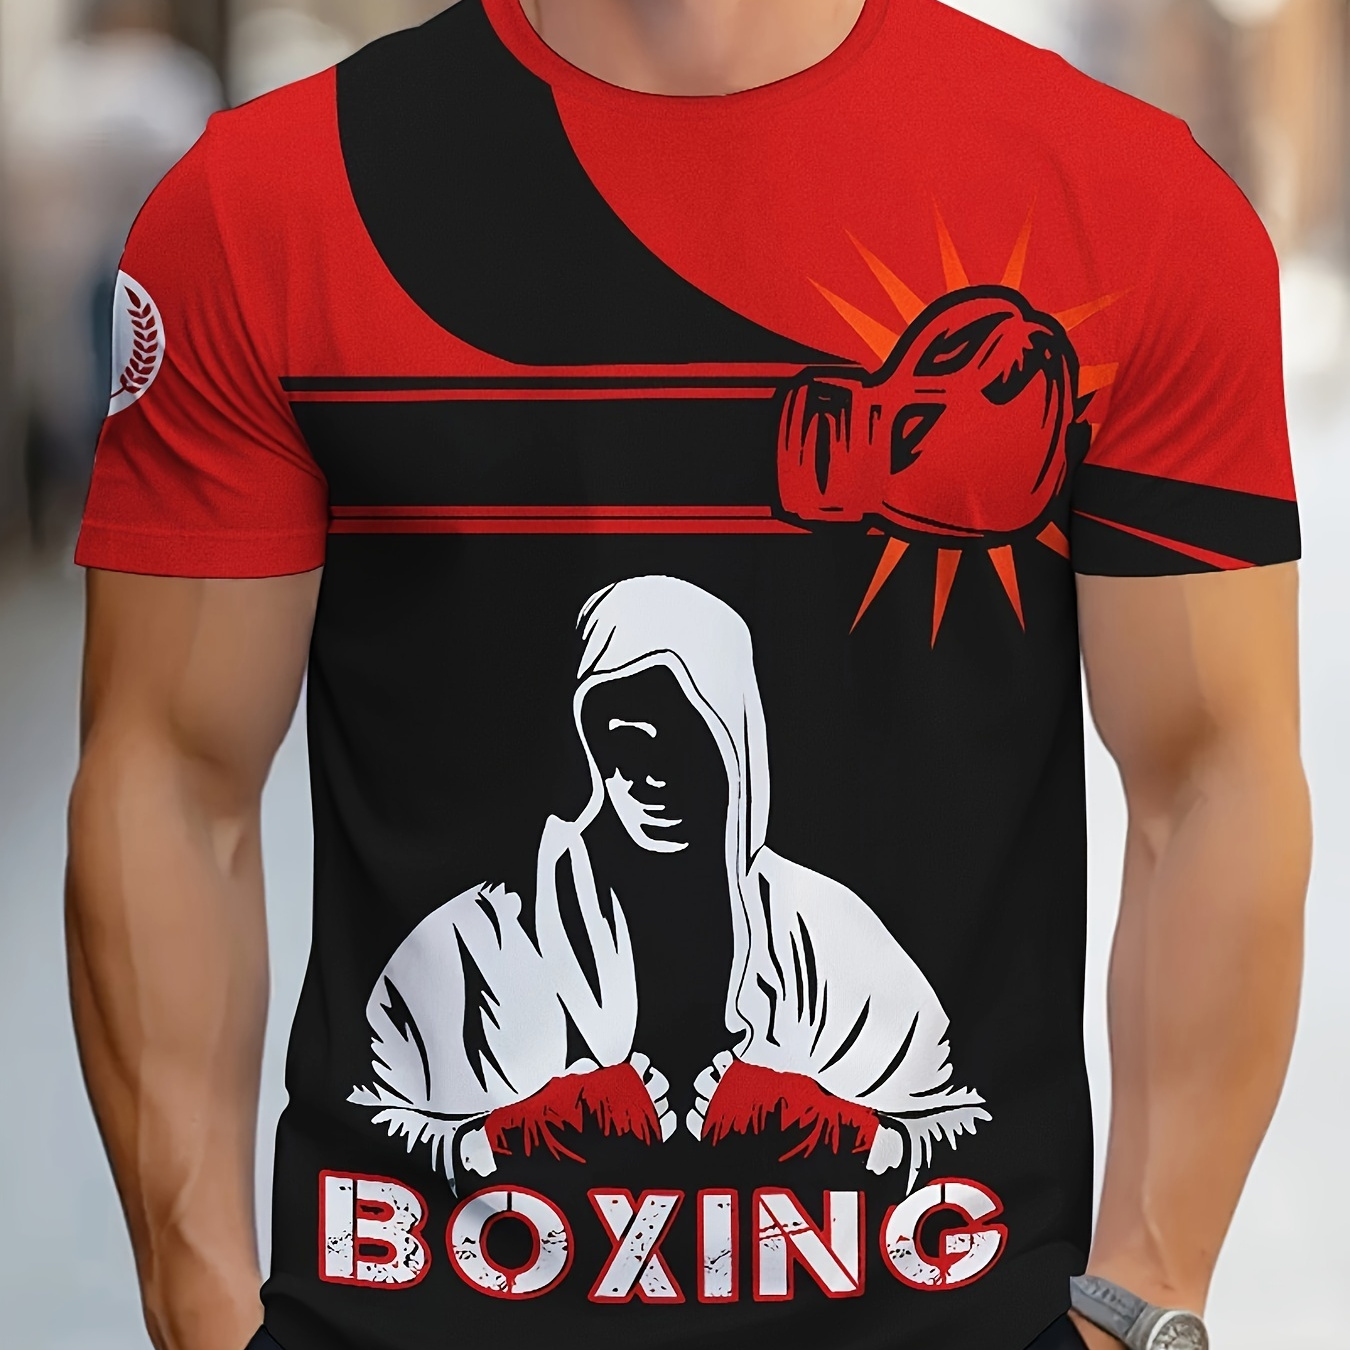 

Men's Boxing Graphic Print T-shirt, Short Sleeve Crew Neck Tee, Men's Clothing For Summer Outdoor